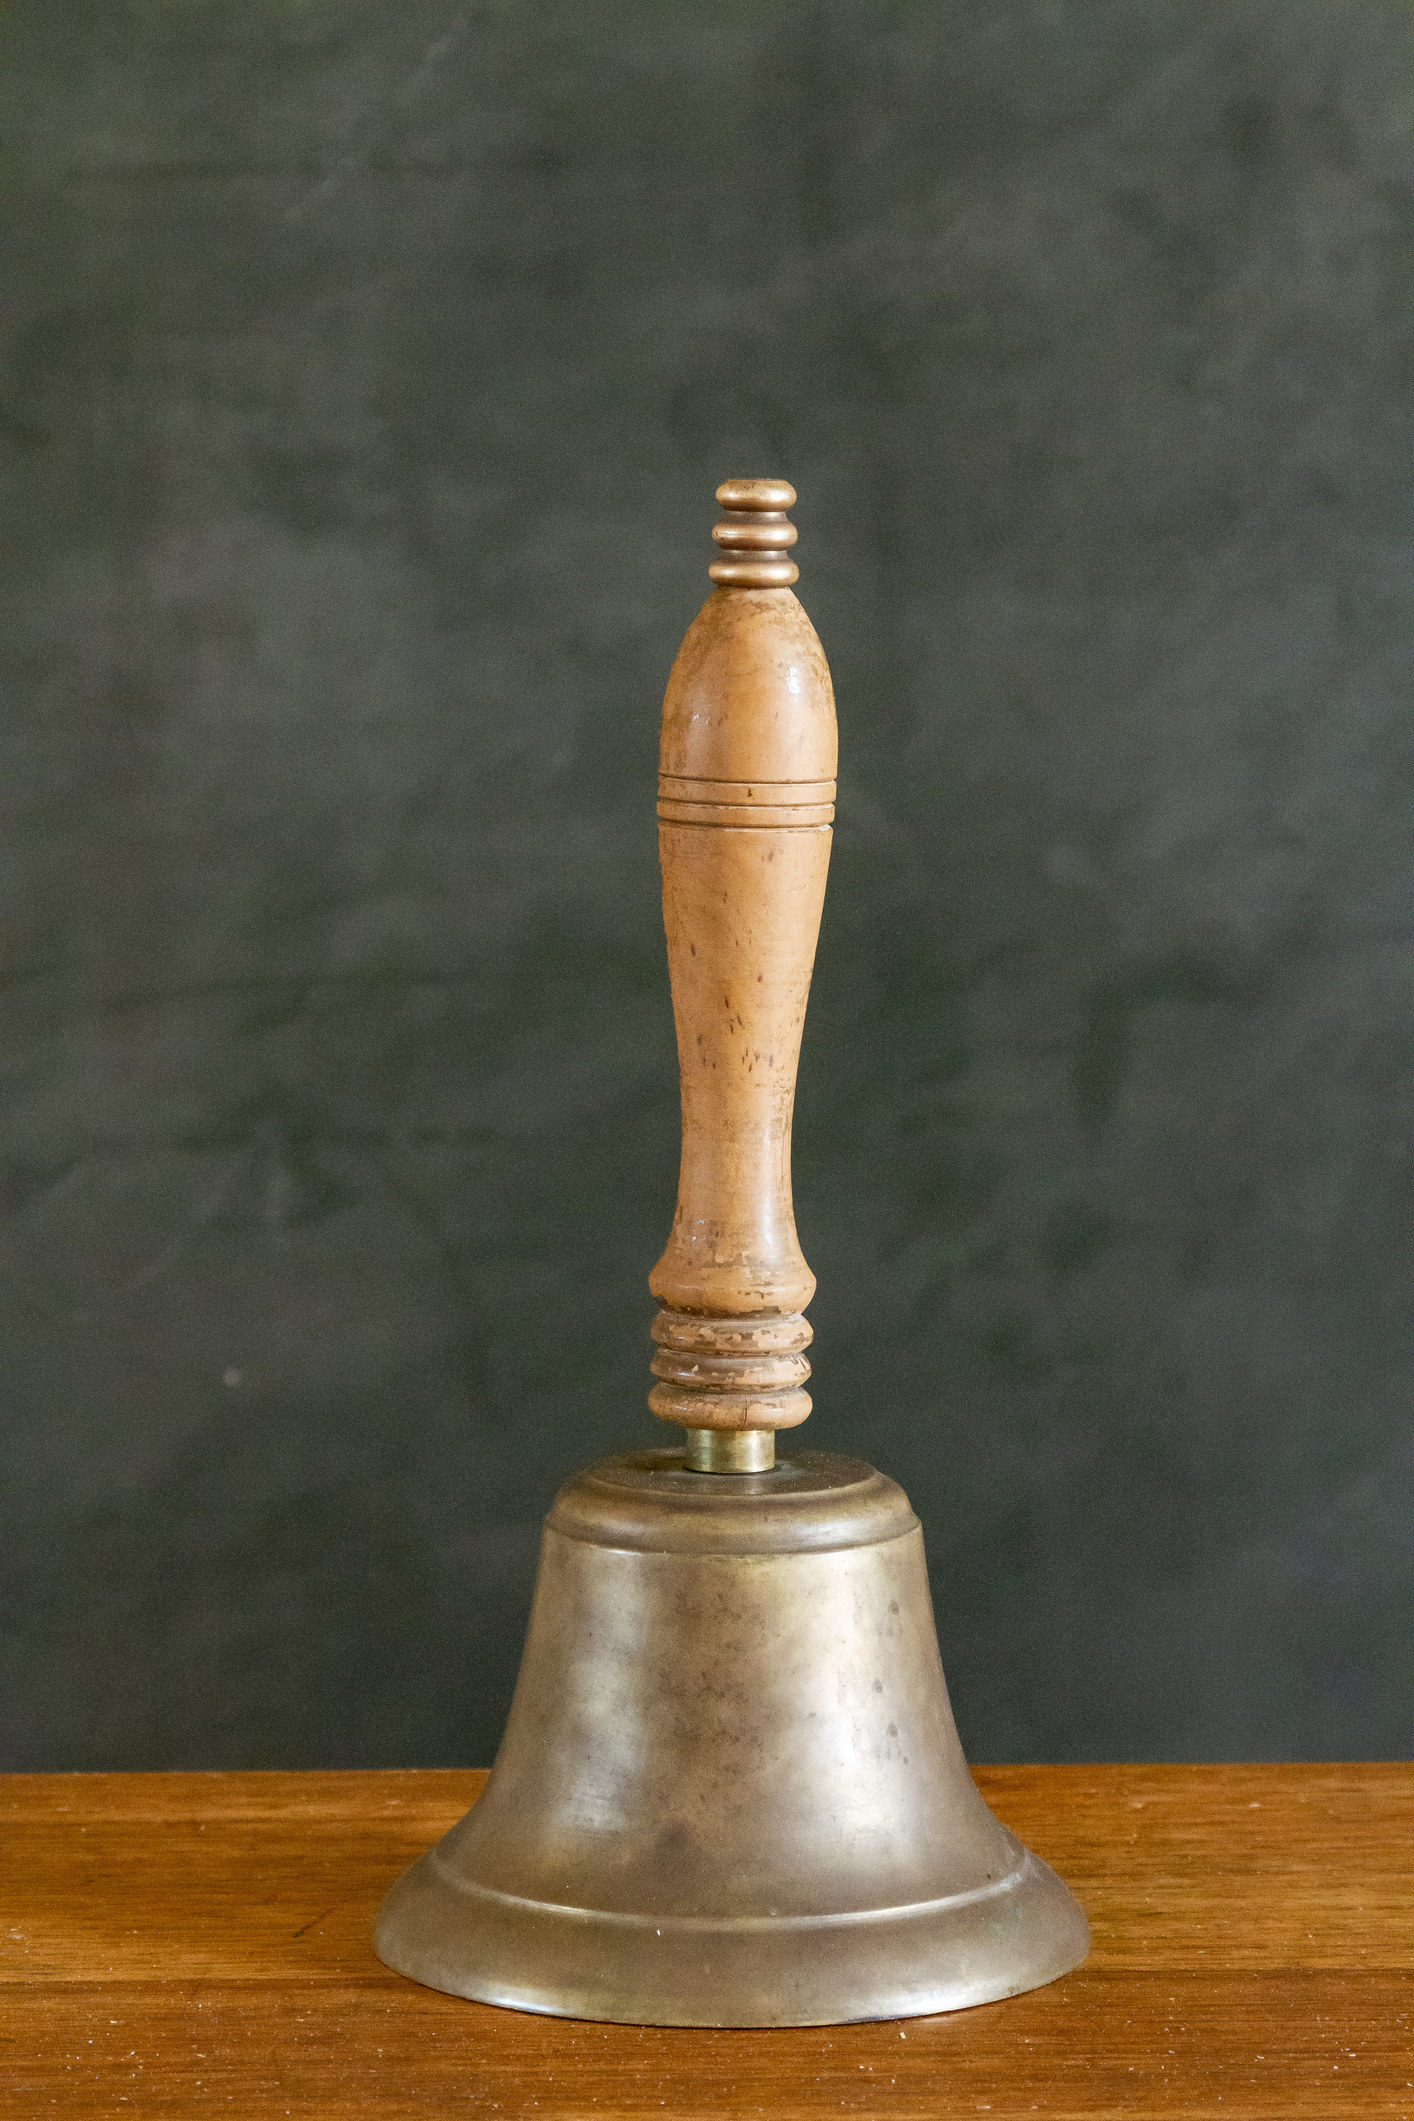 a handheld bell